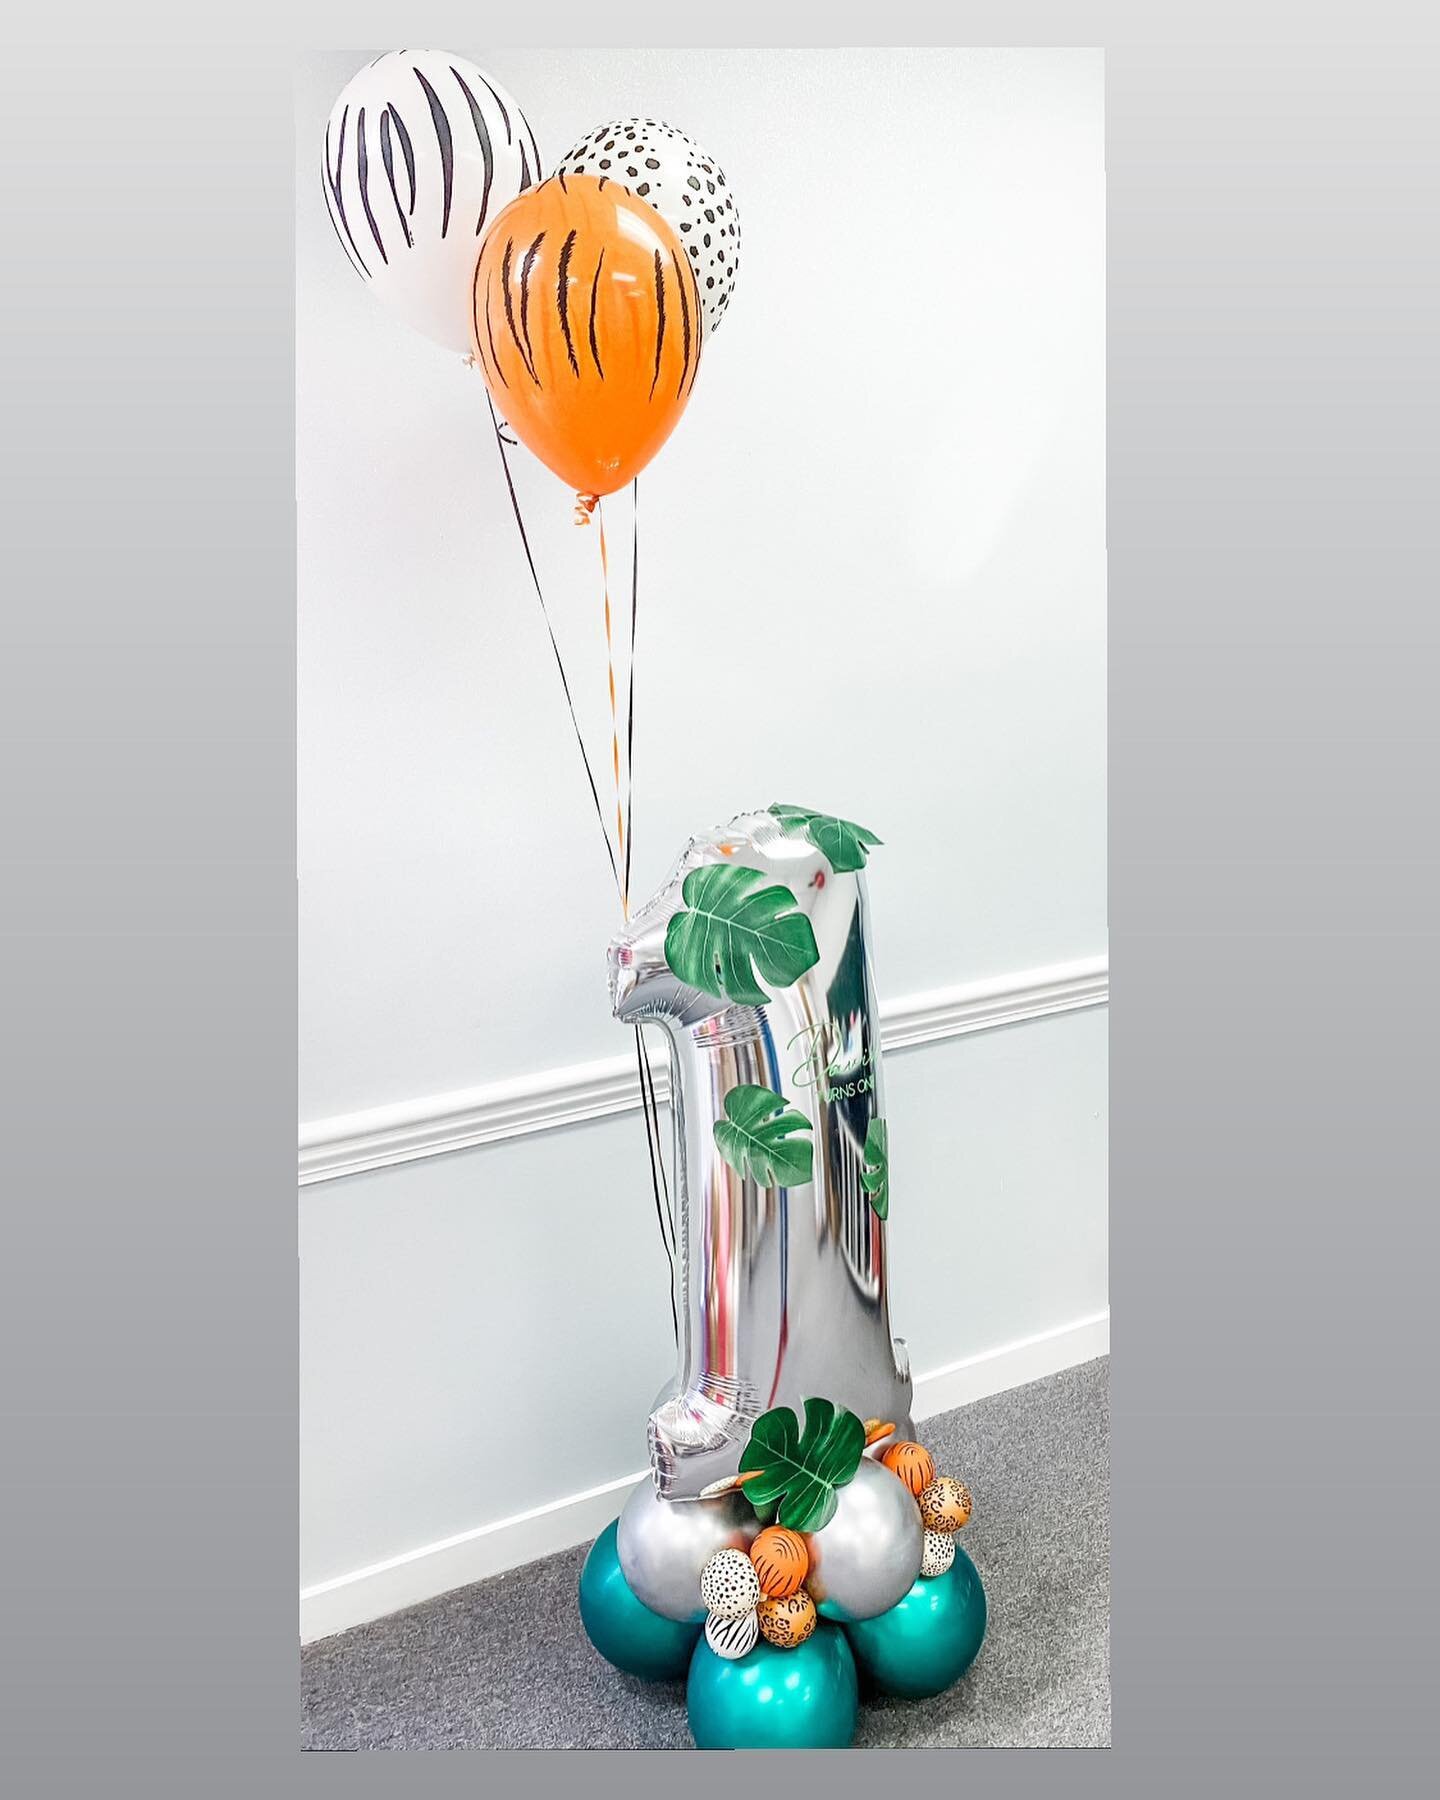 Did you know that we offer mini balloon sculptures? How adorable is this Wild One themed sculpture for baby David 💙

Order your sculpture today on www.Babaloonz.com 

CALL/TXT 601-706-9010
#babaloonz #babaloonzballoons #balloonpickup #balloonsculptu